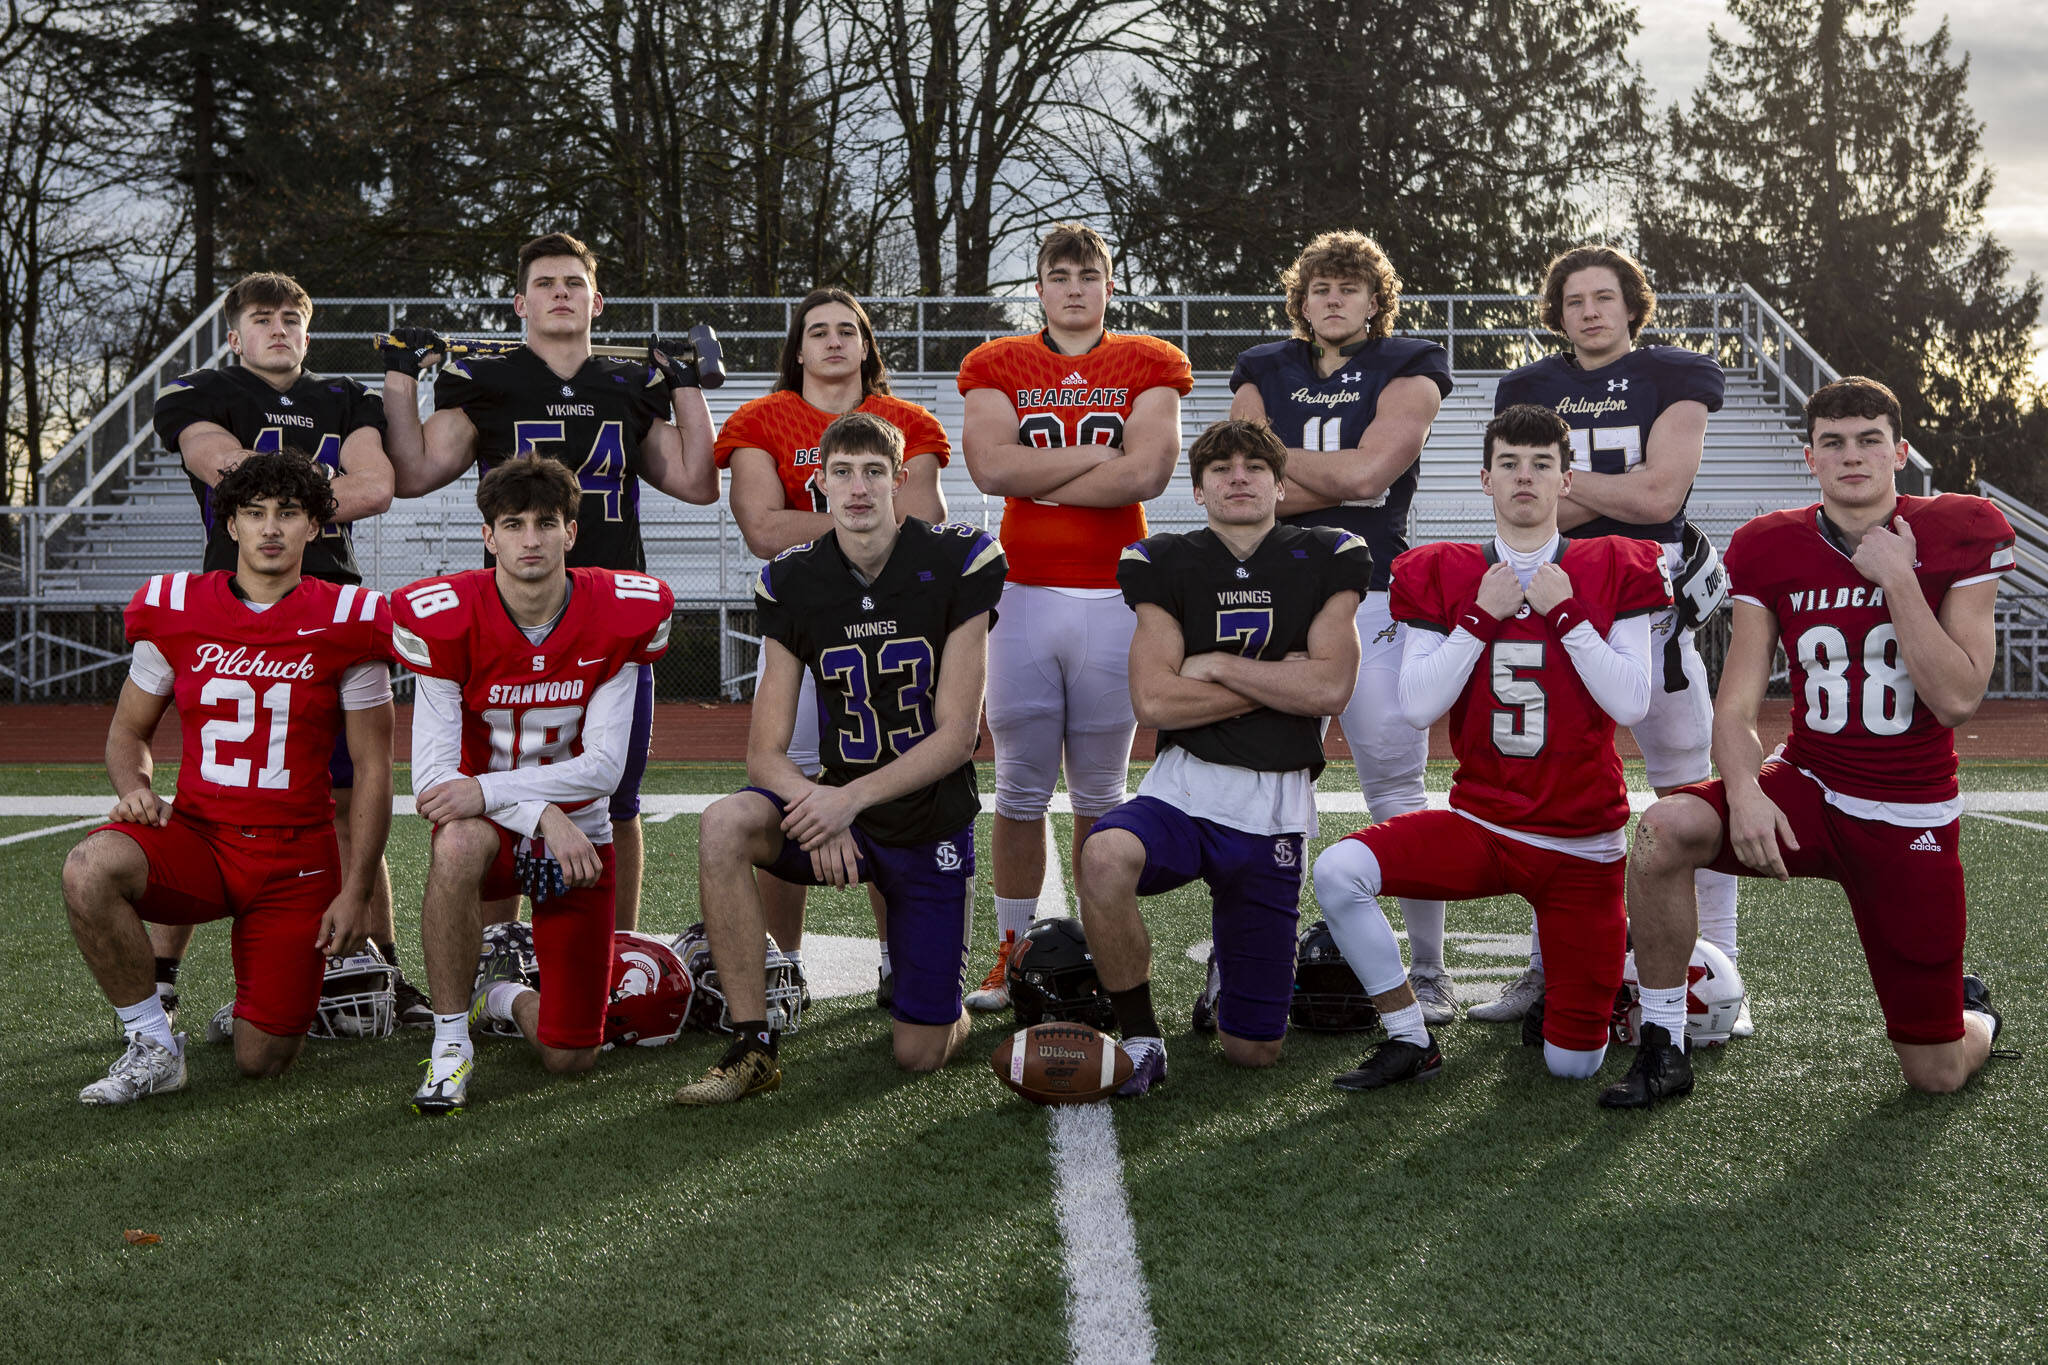 (Left to right, back row to front row) Gage Solomon (44), Mason Turner (54), Nick Mouser (15), Brennan Sheppard (88), Jeremy Fleming (11), Kobi Spady (37), Kenai Sinaphet (21), Max Mayo (18), David Brown (33), Gabe Kylany (7) Matthew Williams (5) and Jack Sievers (88) pose for a photo at Lake Stevens High School in Lake Stevens, Washington on Sunday, Dec. 17, 2023. (Annie Barker / The Herald)